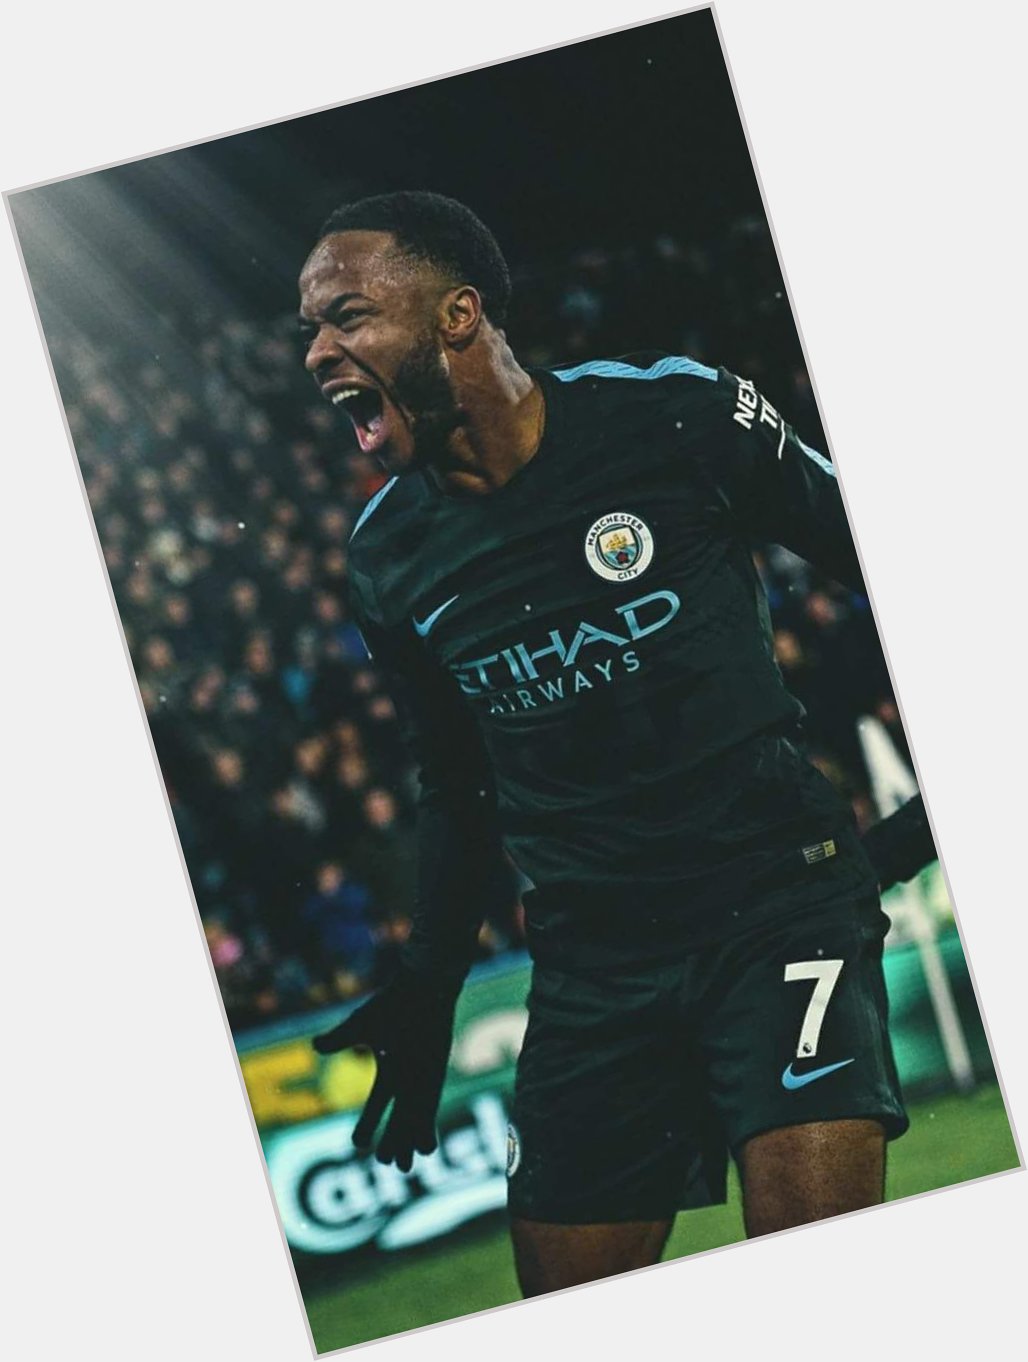 Happy Birthday Raheem Sterling. Many more last minute winners to come.   